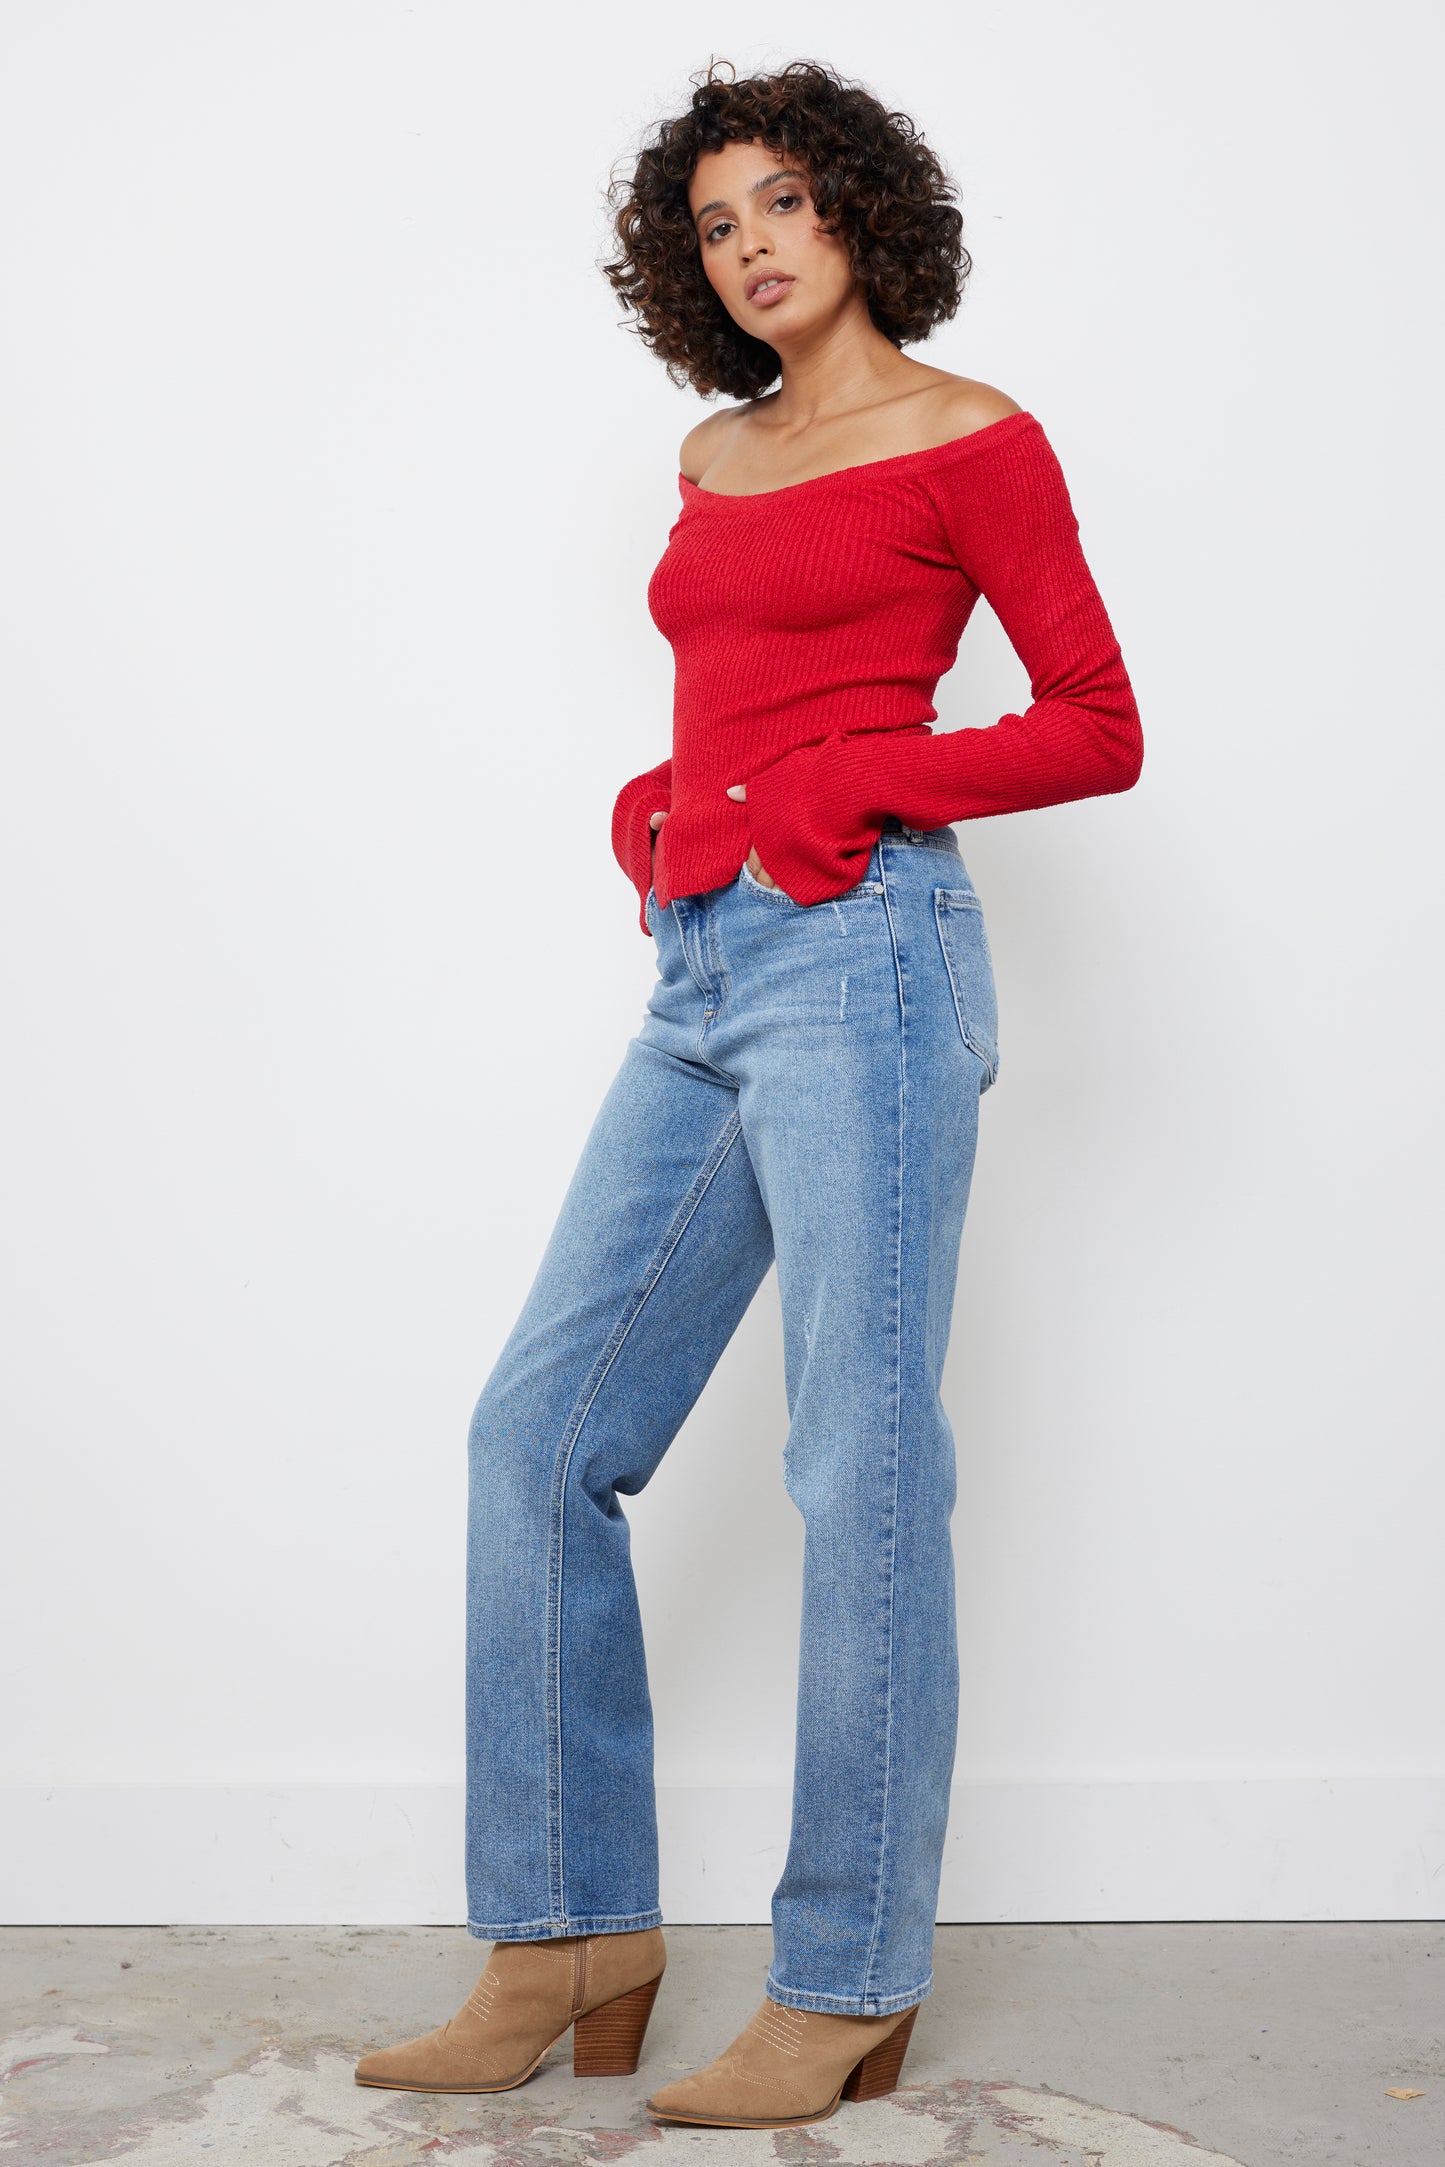 Offly Nice Red Knit Top